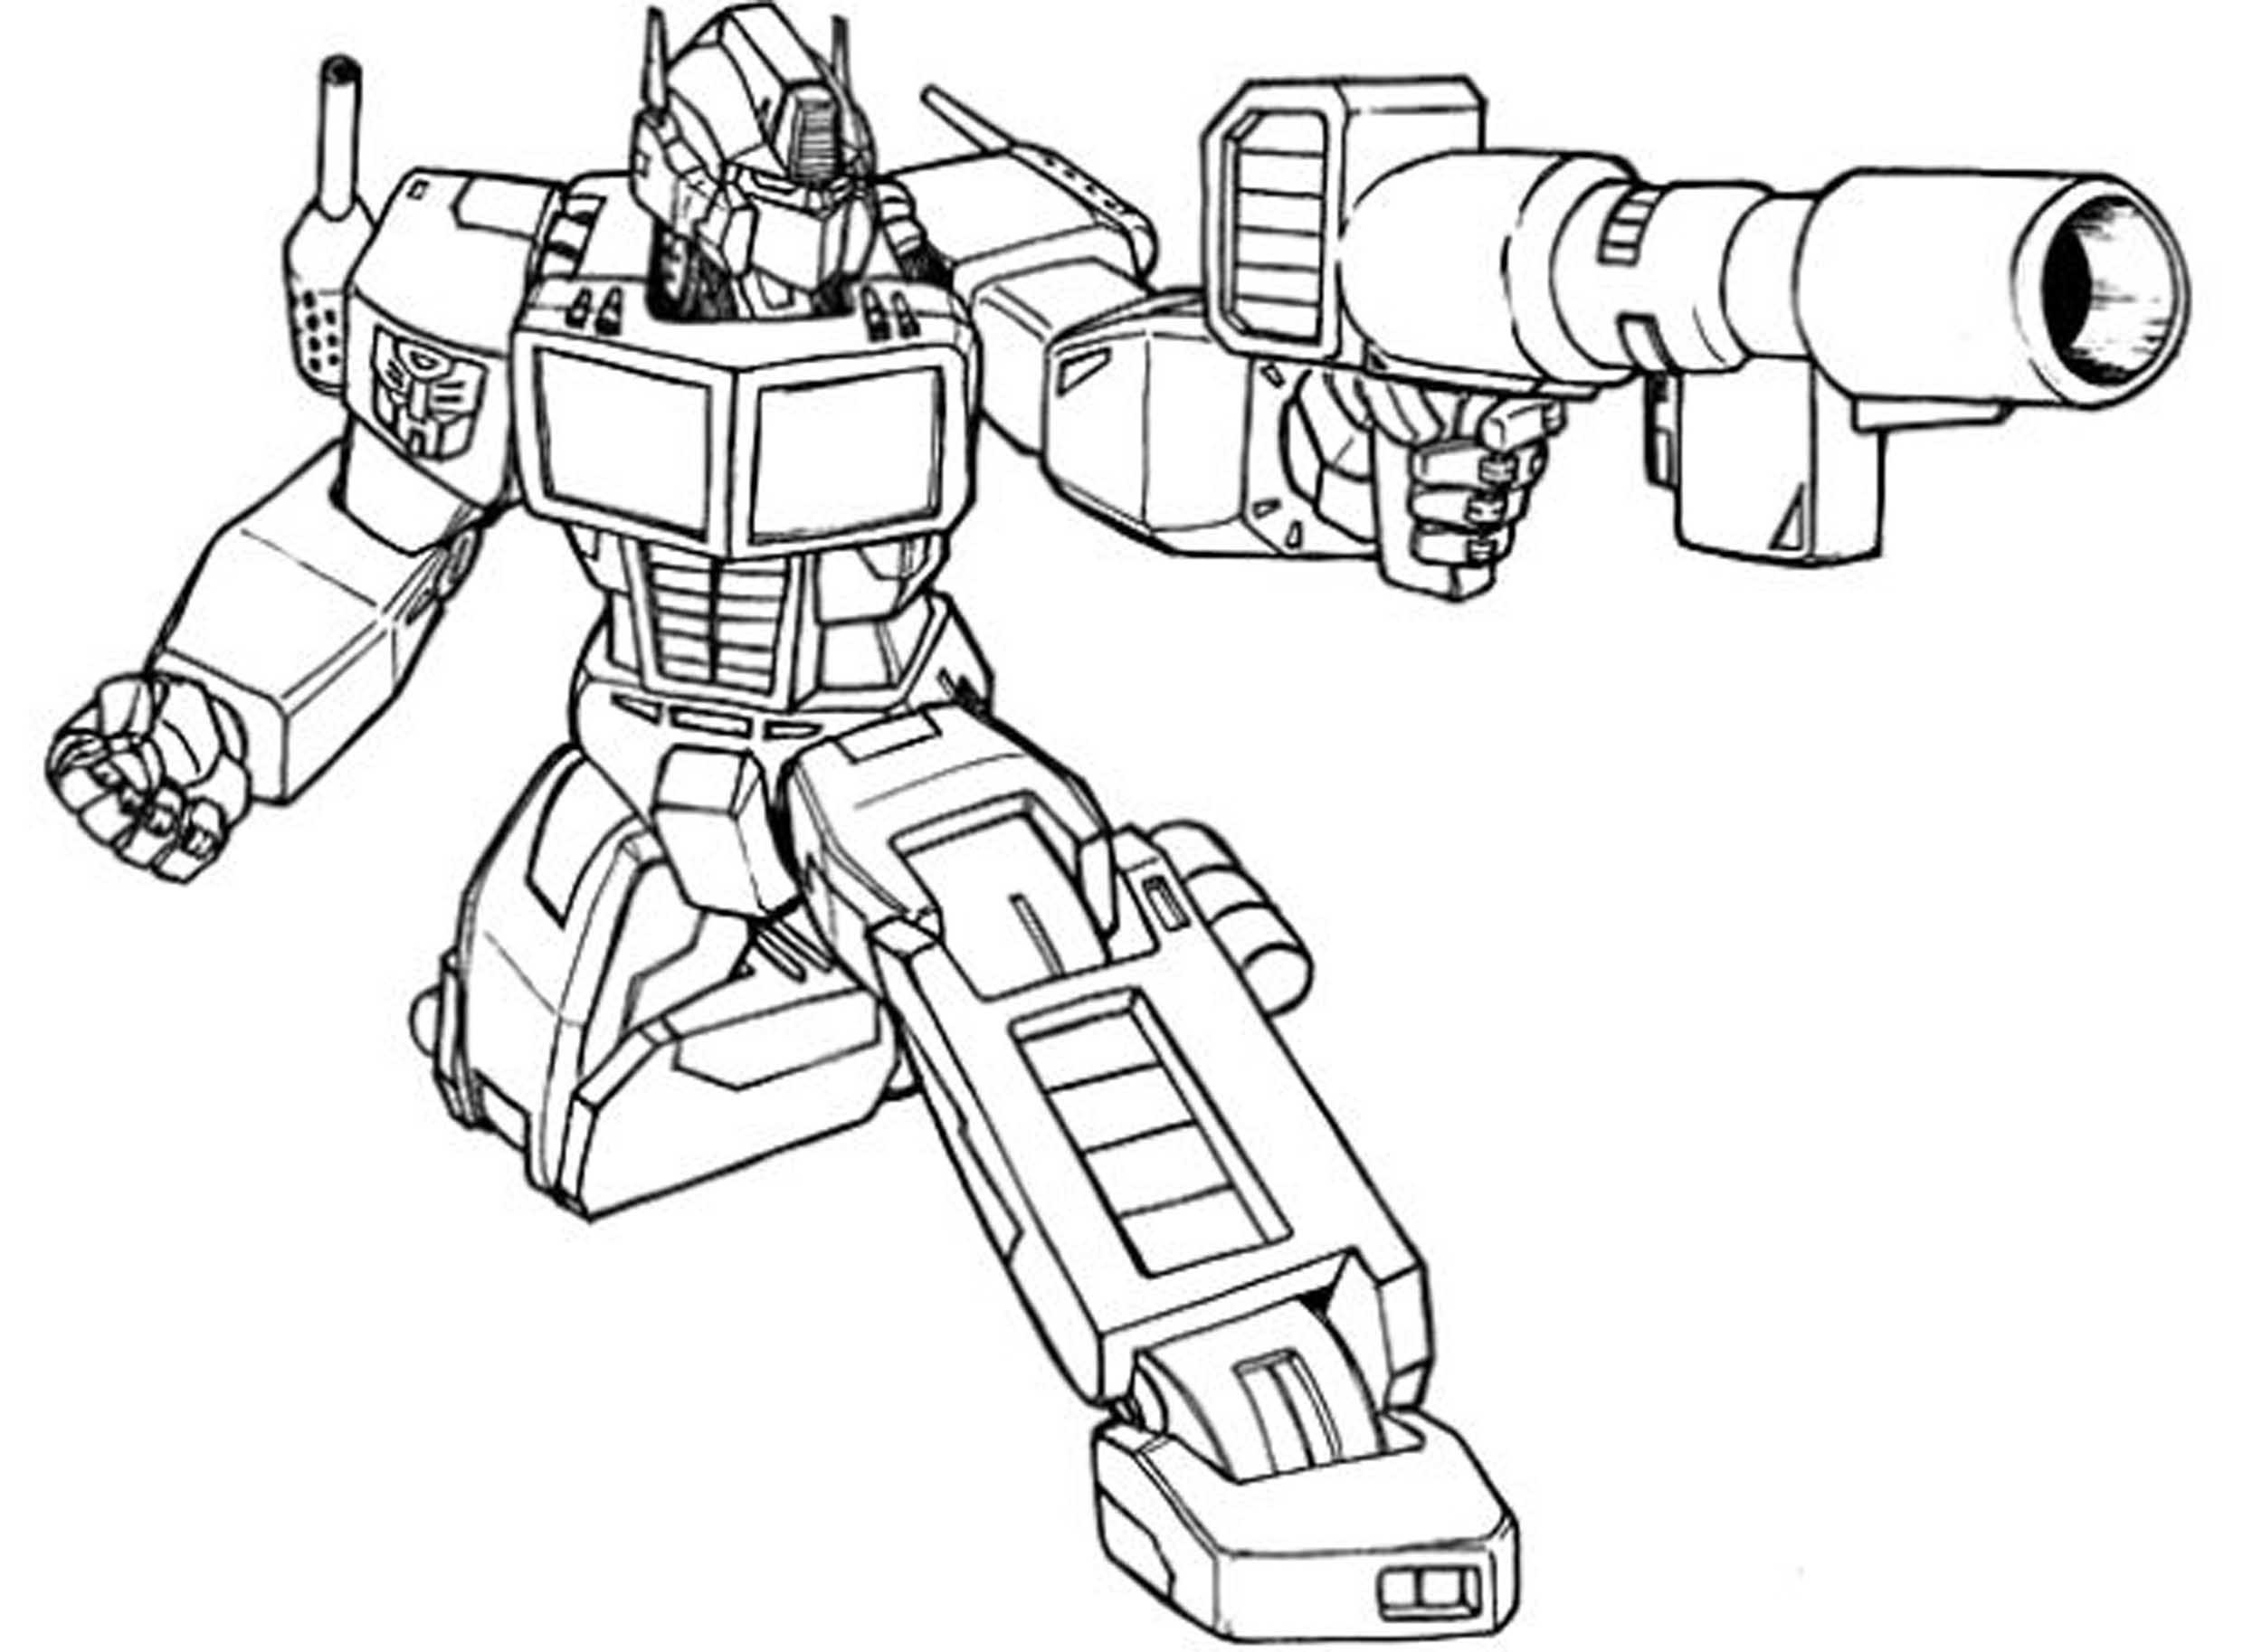 coloring pages : Transformers Rescue Bots Coloring Page Pages To Print Best  Of Inviting Kids Do The 64 Transformers Rescue Bots Coloring Page Photo  Ideas ~ mommaonamissioninc